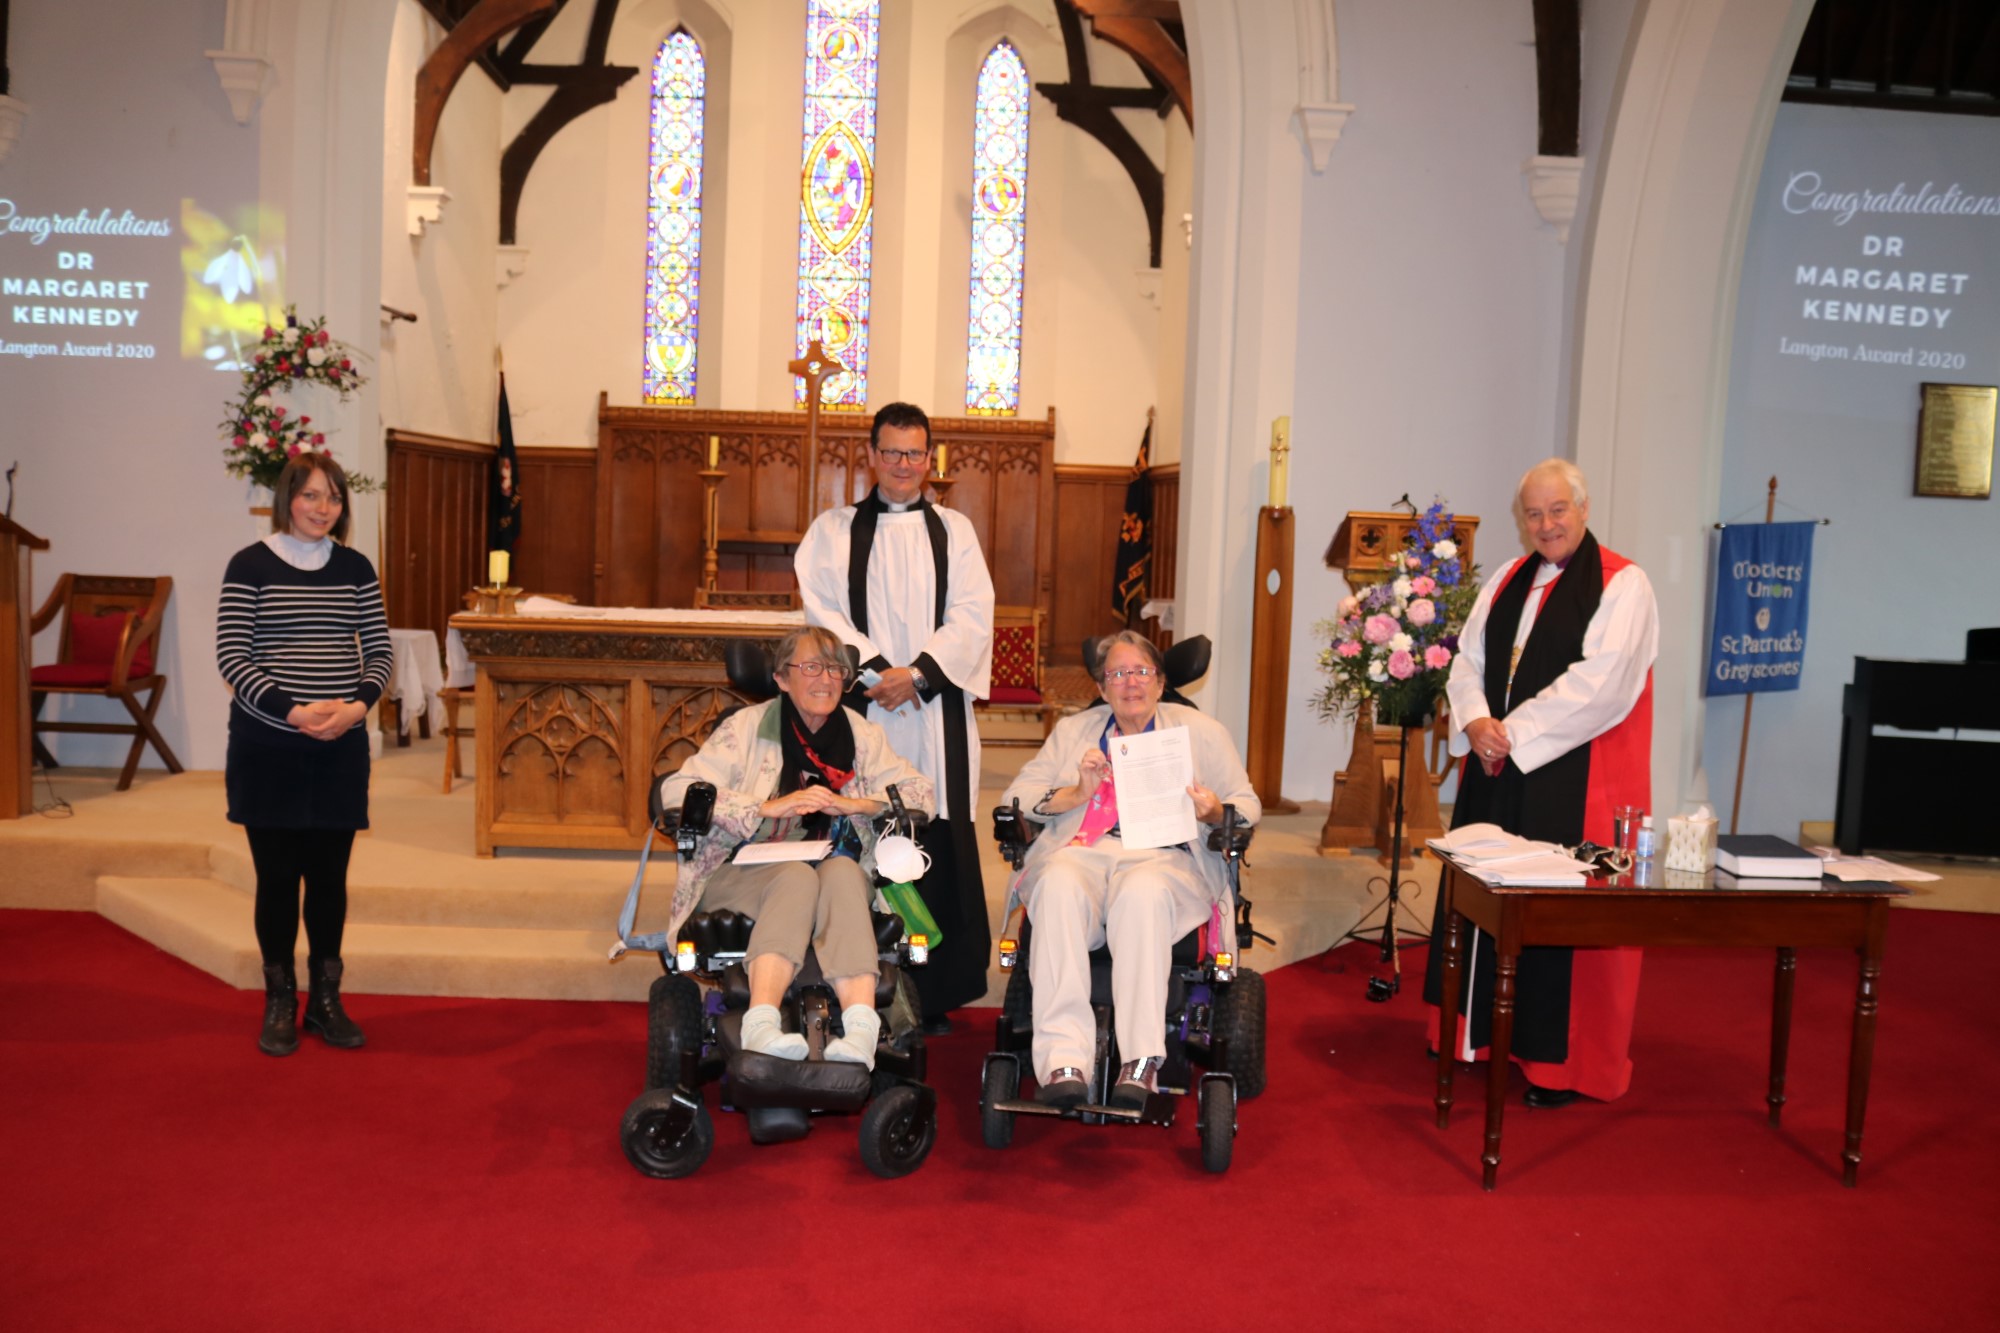 From left: the Revd Rebecca Guildea; Ms Ann Kennedy; the Revd David Mungavin, Rector of Greystones; Dr Margaret Kennedy; and Archbishop Michael Jackson.